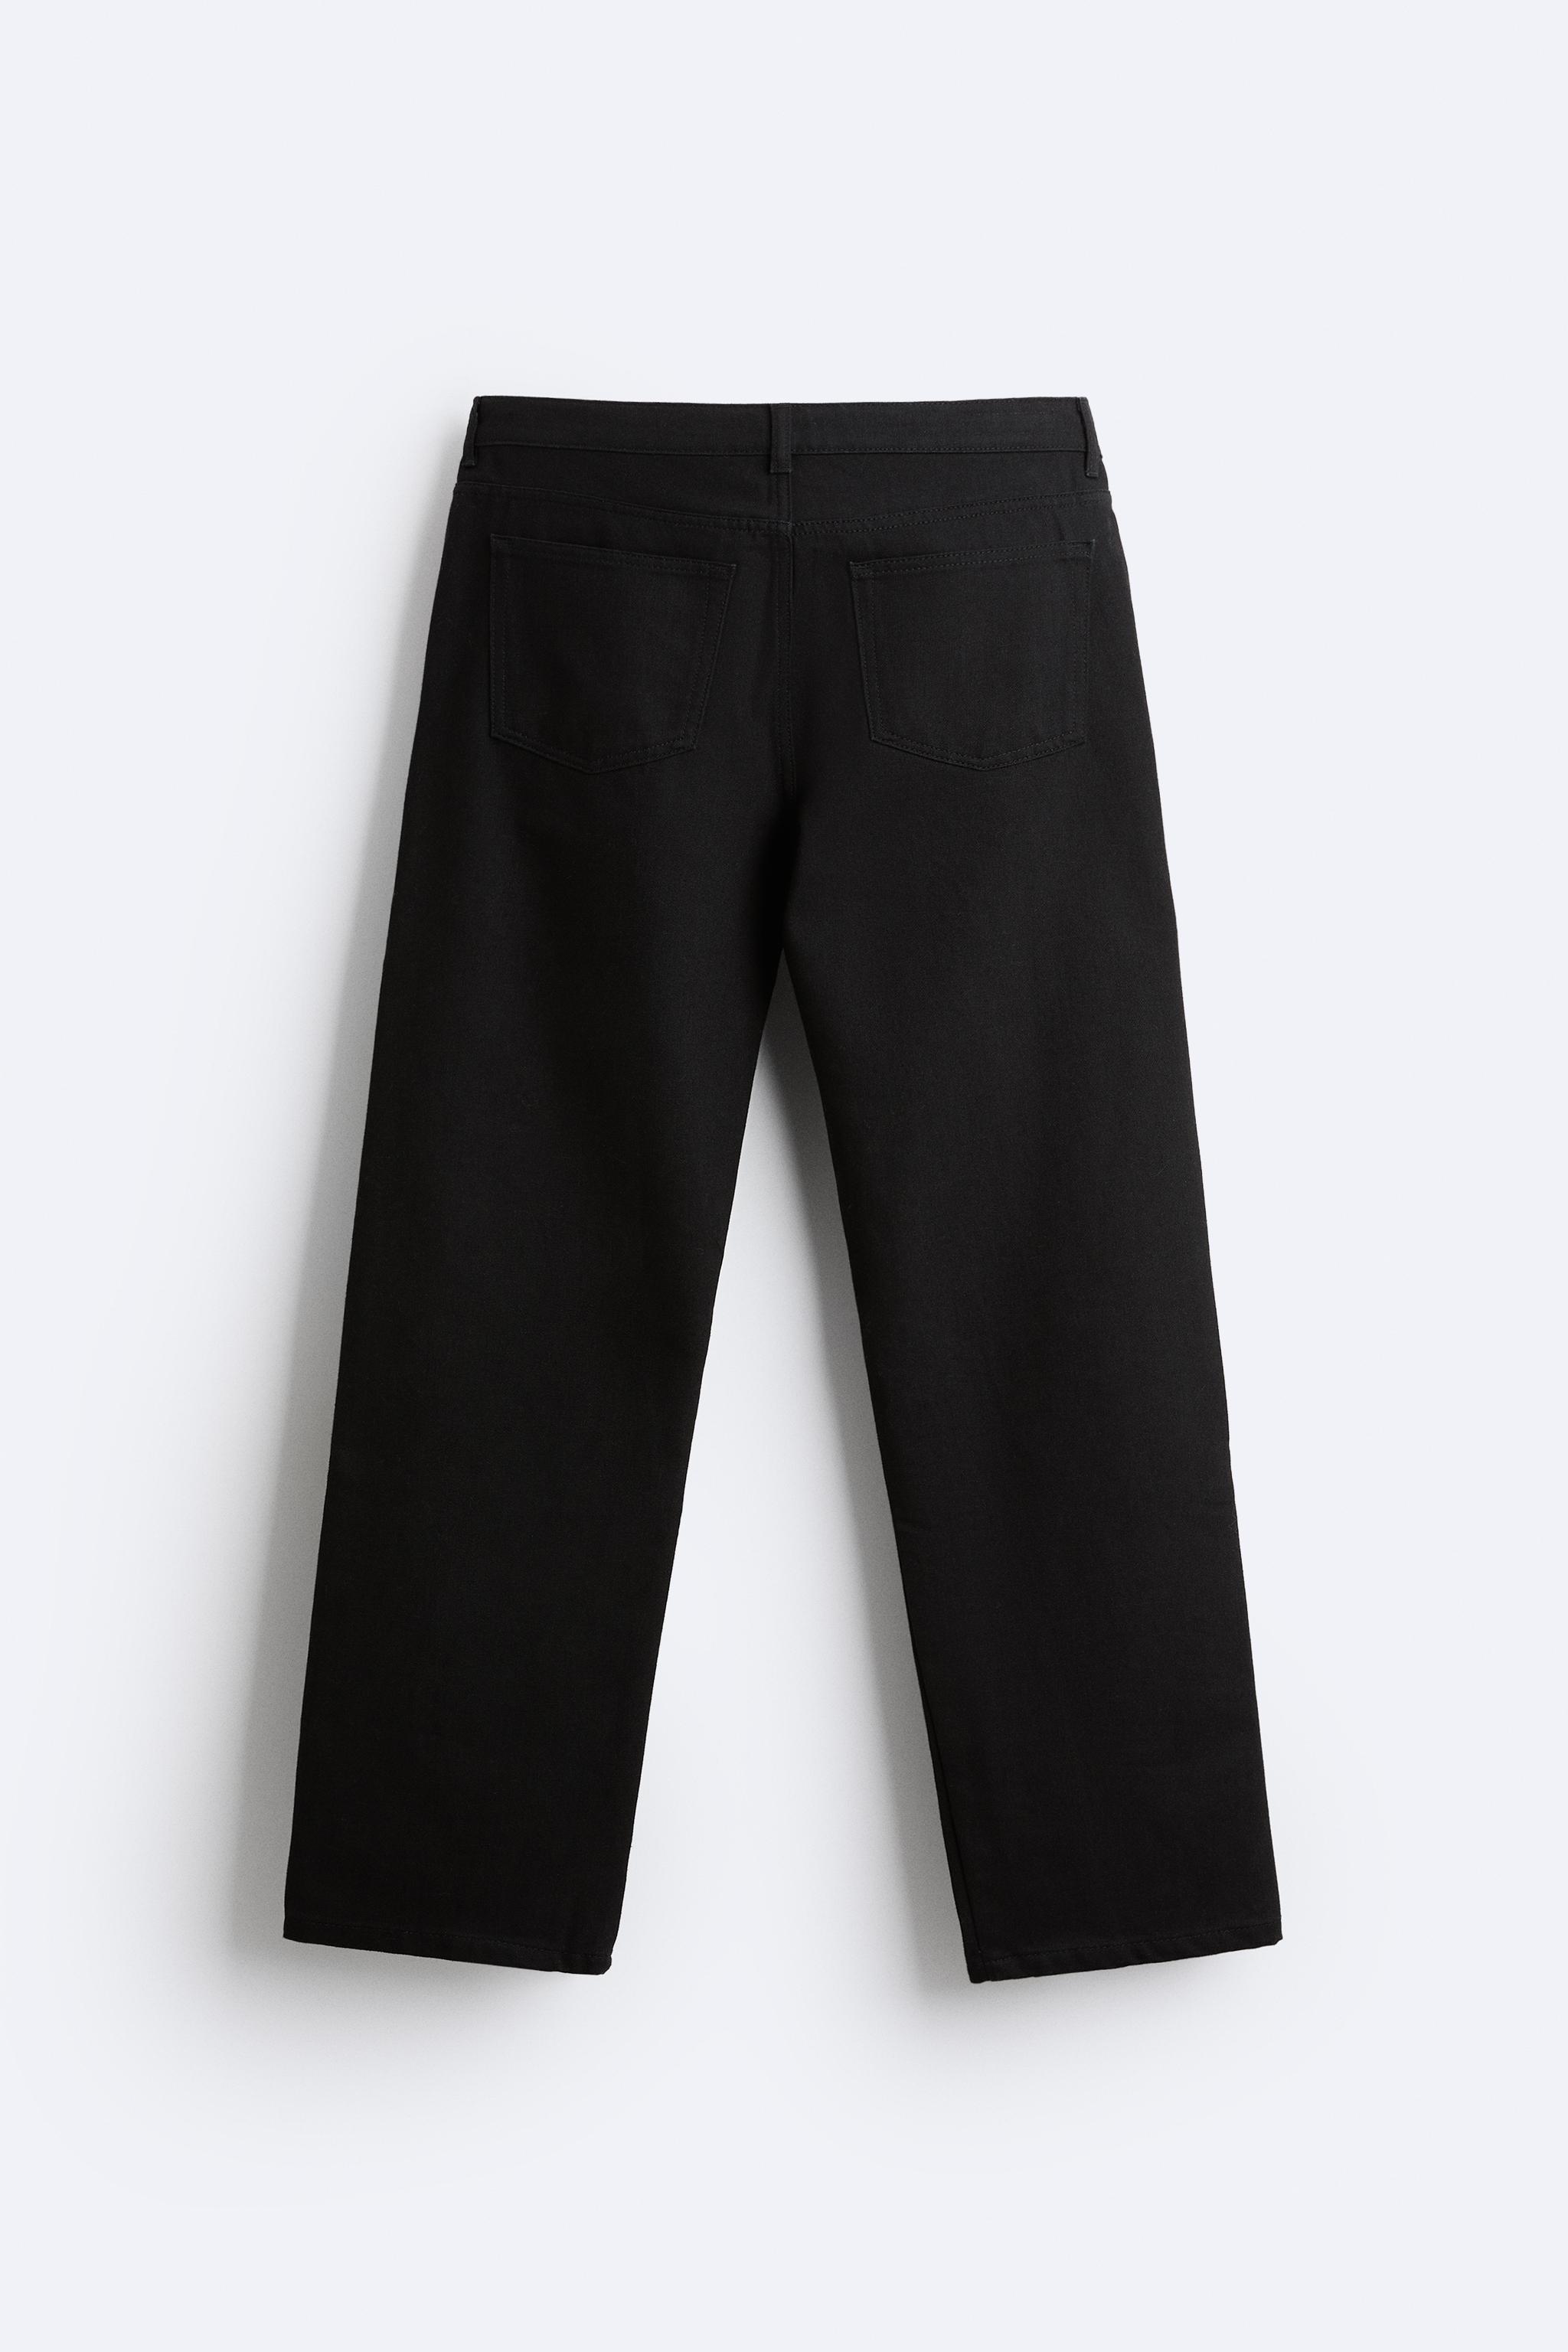 ZARA Flared Pants>>>> Follow us to stay tuned next Zara Collection is, zara flared jeans men